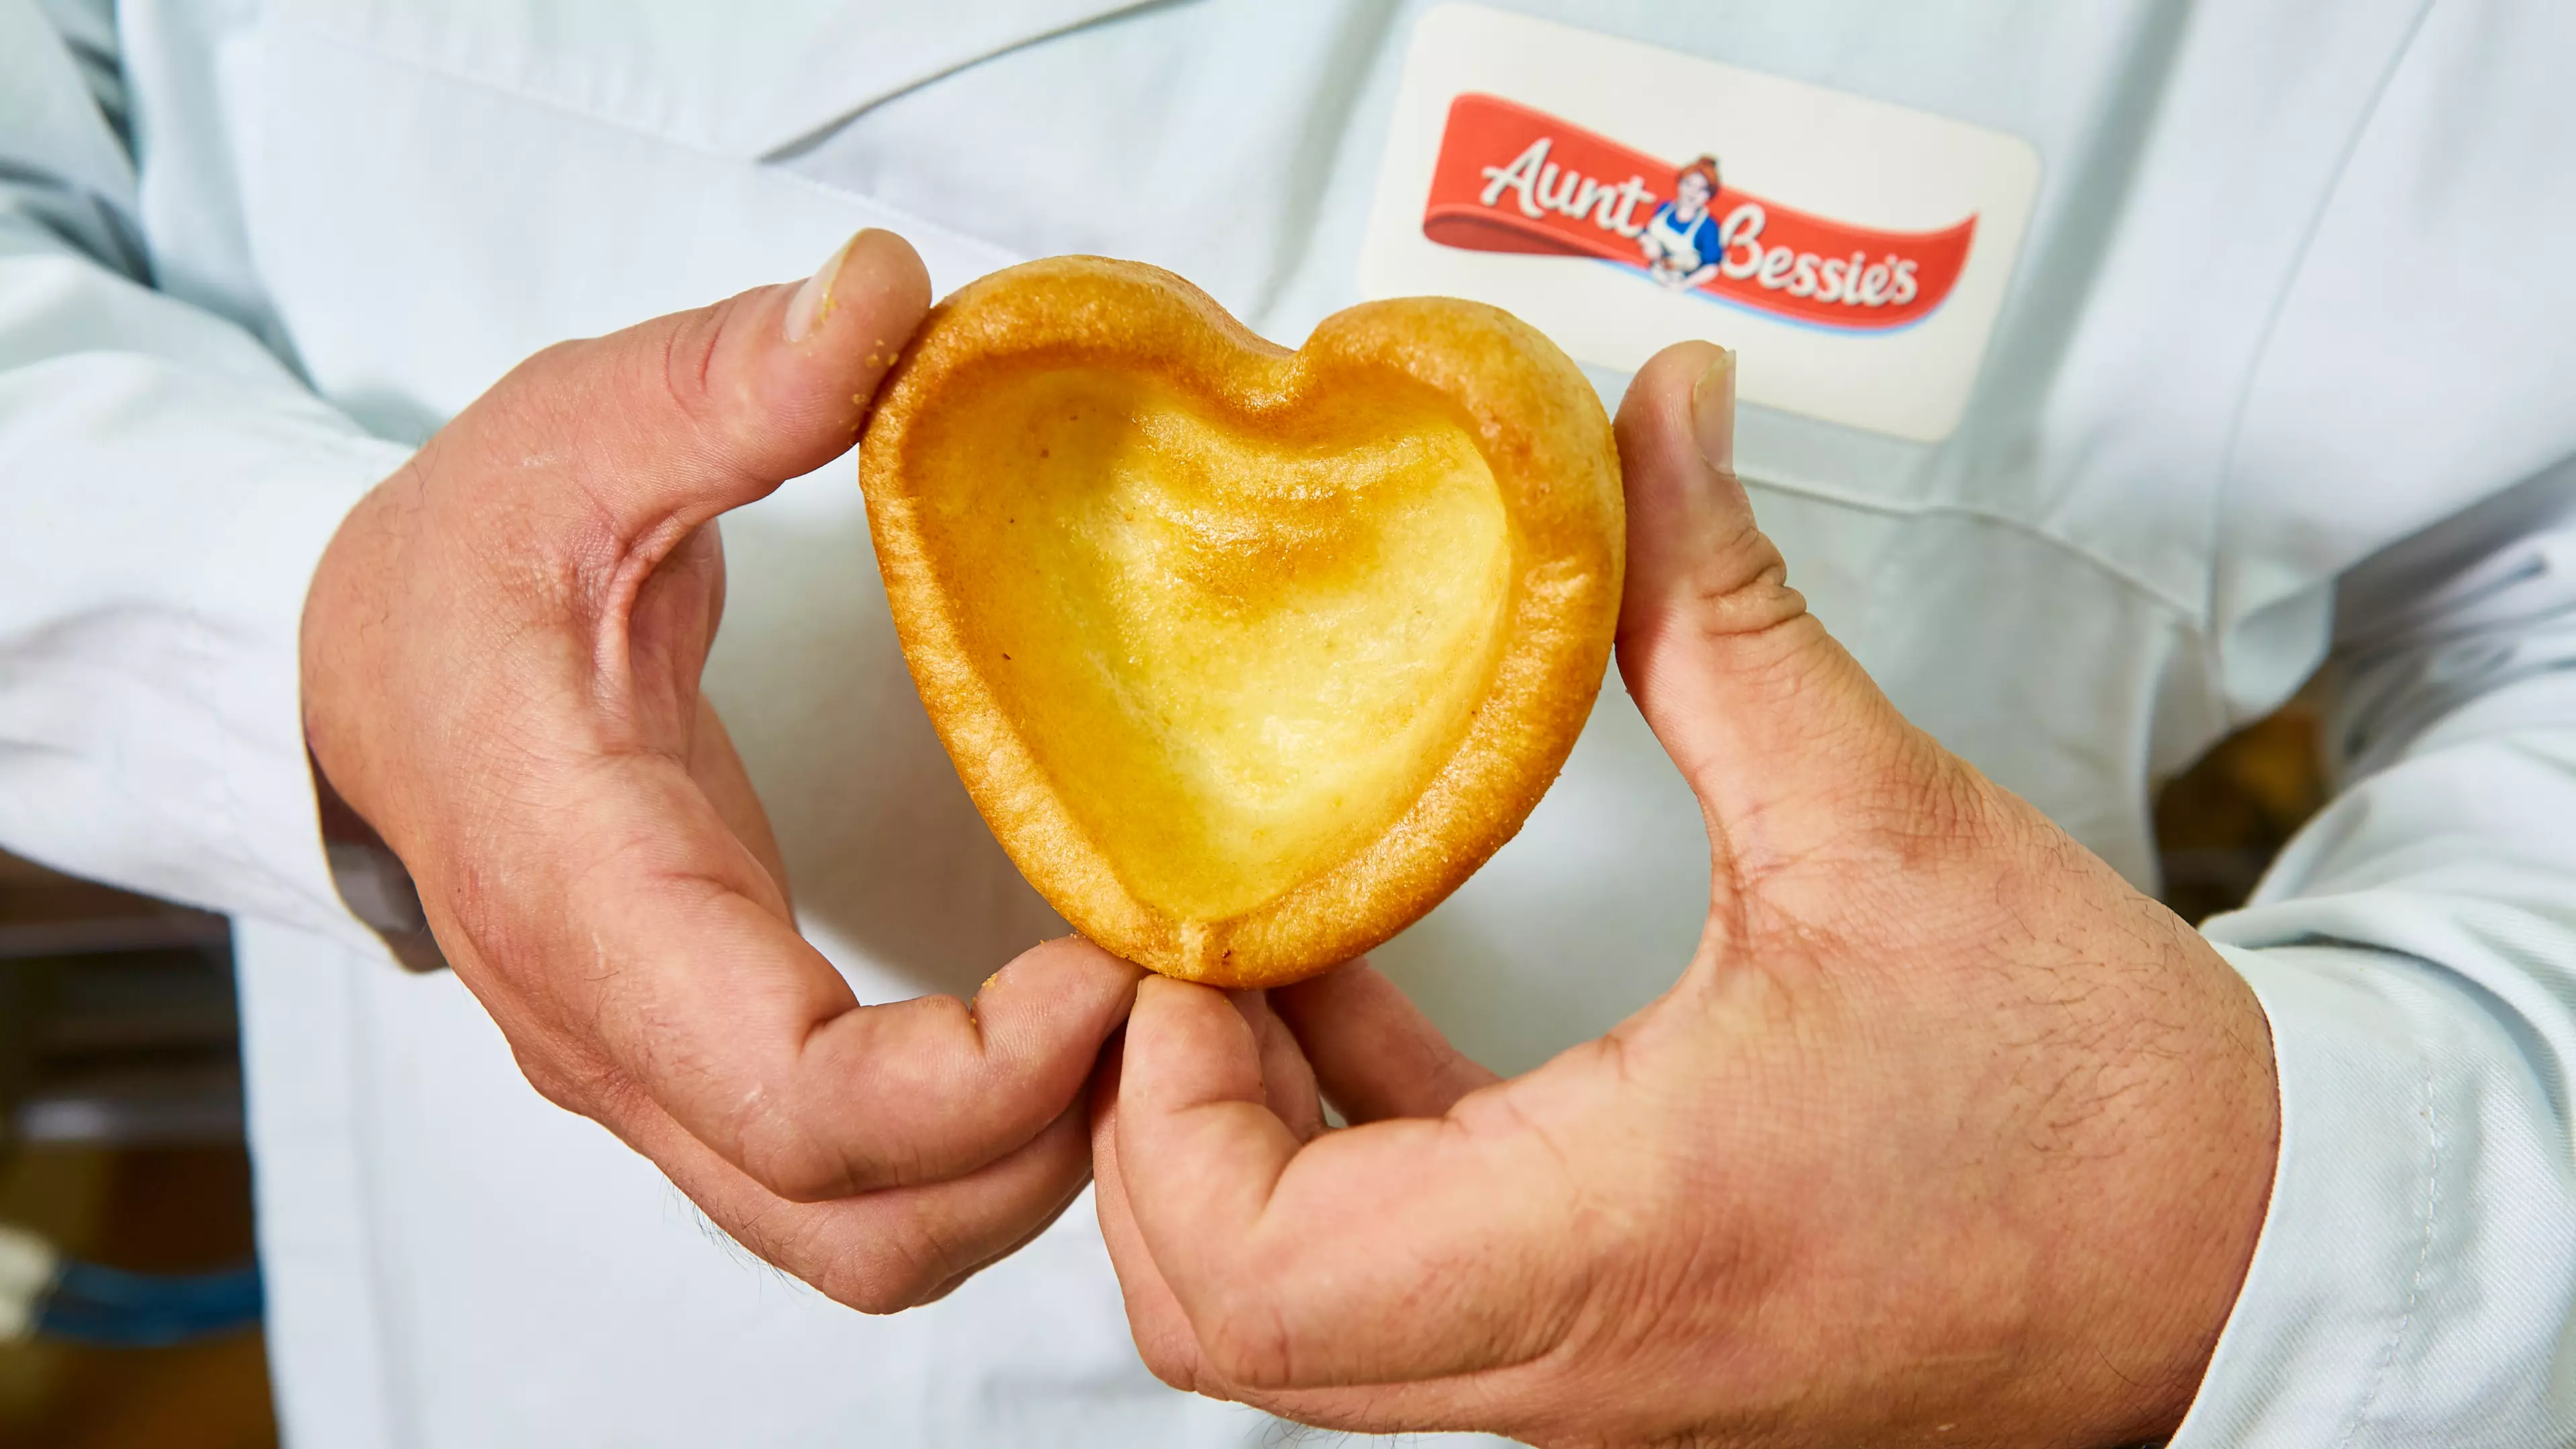 You Can Now Let Someone Know You Love Them With A Yorkshire Pudding